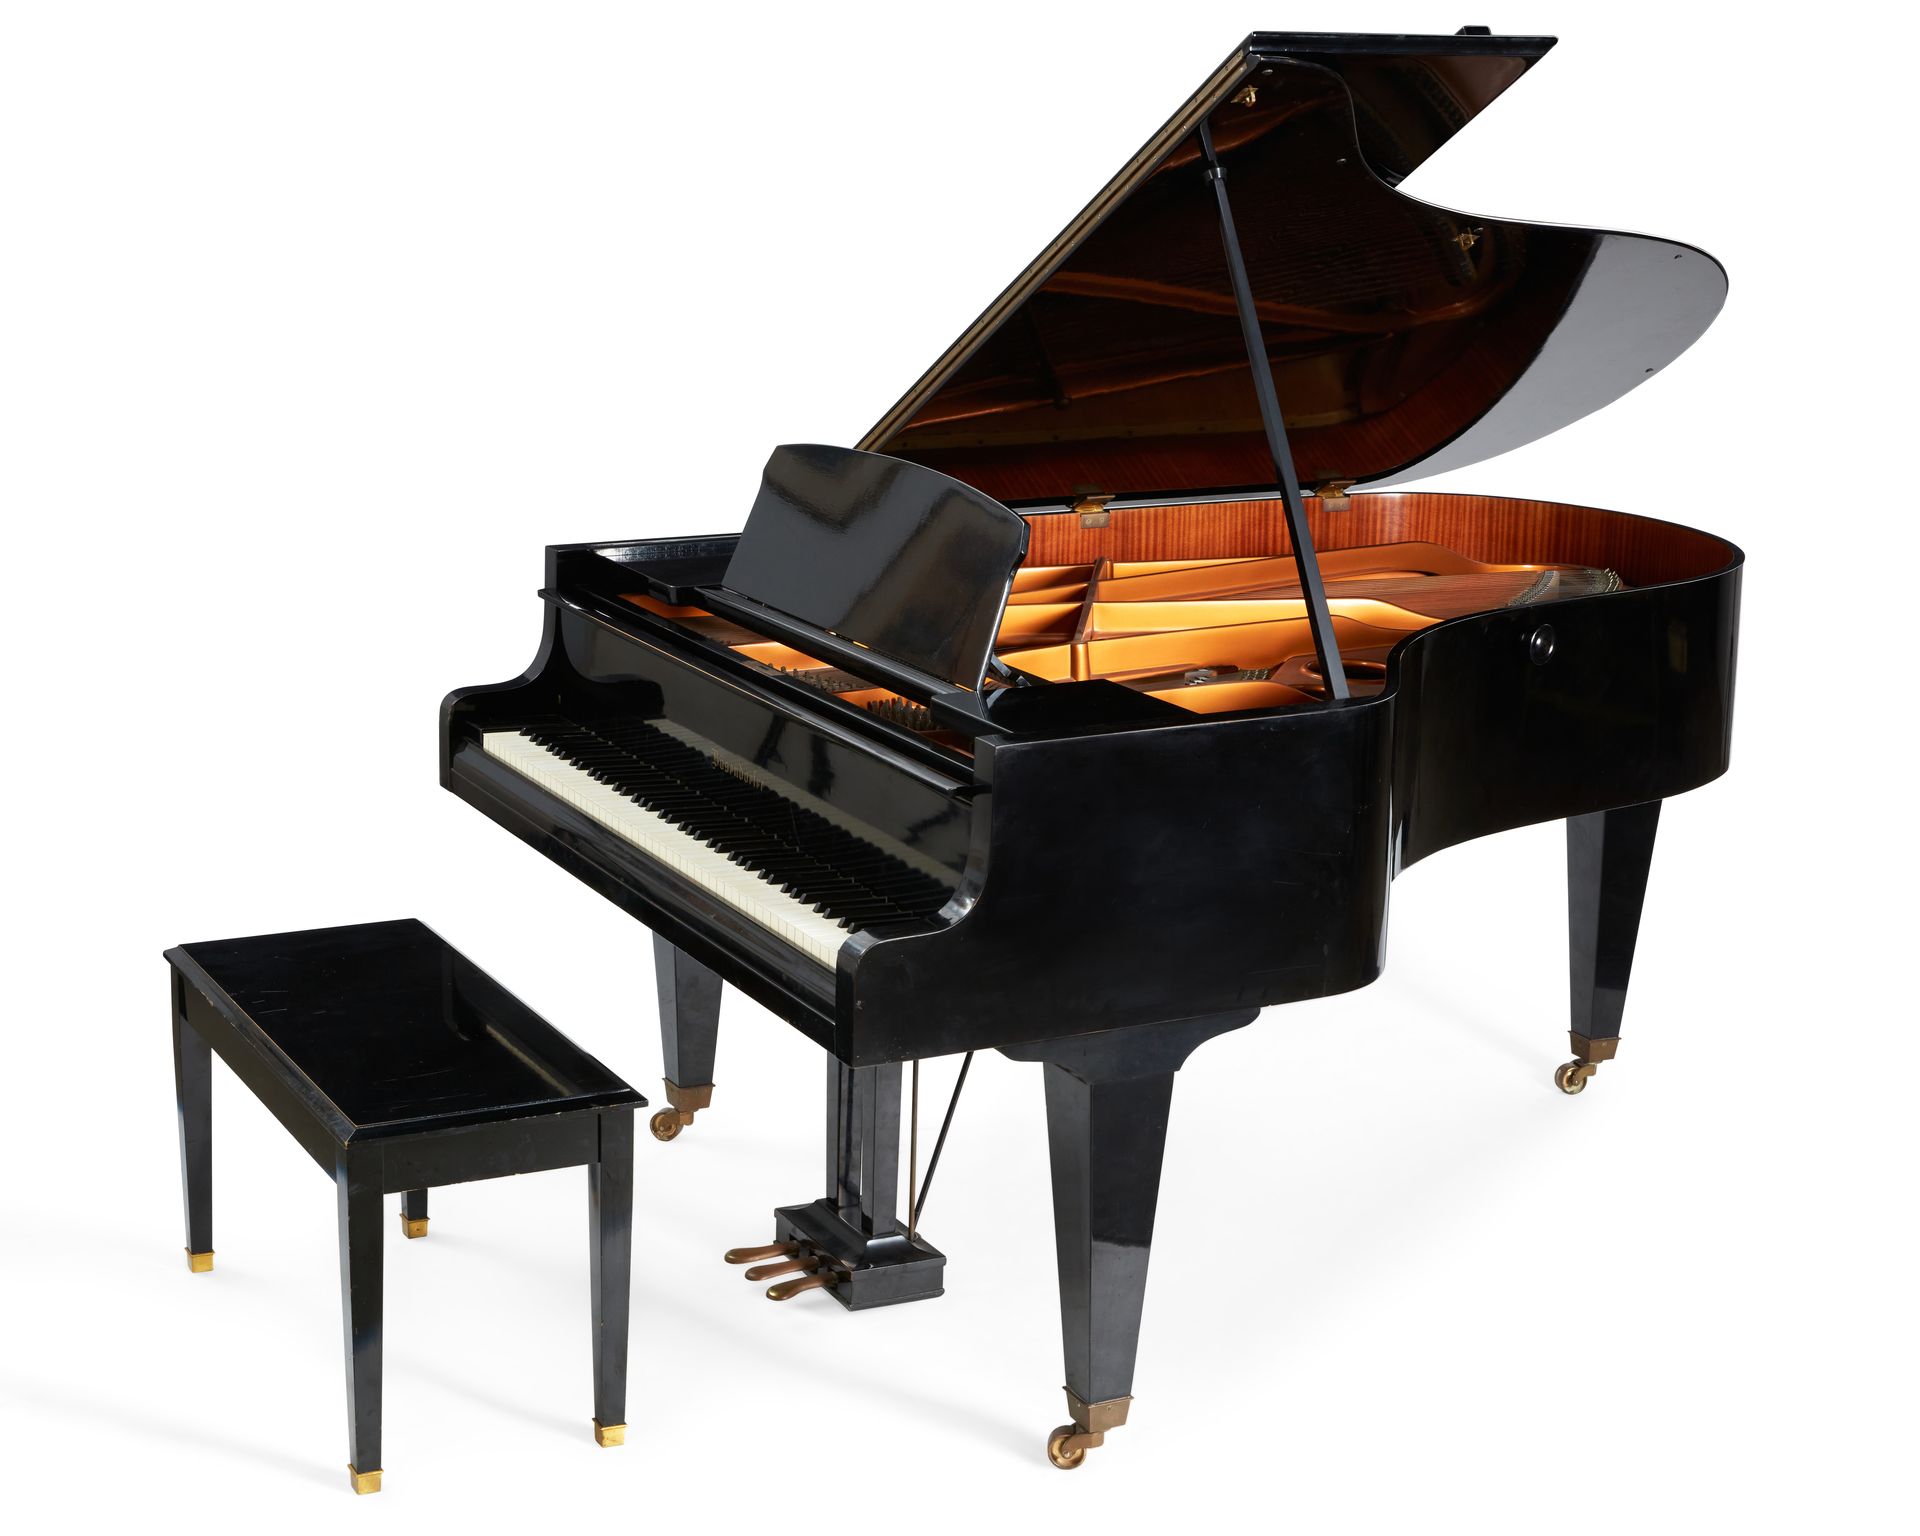 Bosendorfer ebonized seven-foot baby grand piano from the Mitzi Gaynor collection, est. $6,000-$8,000